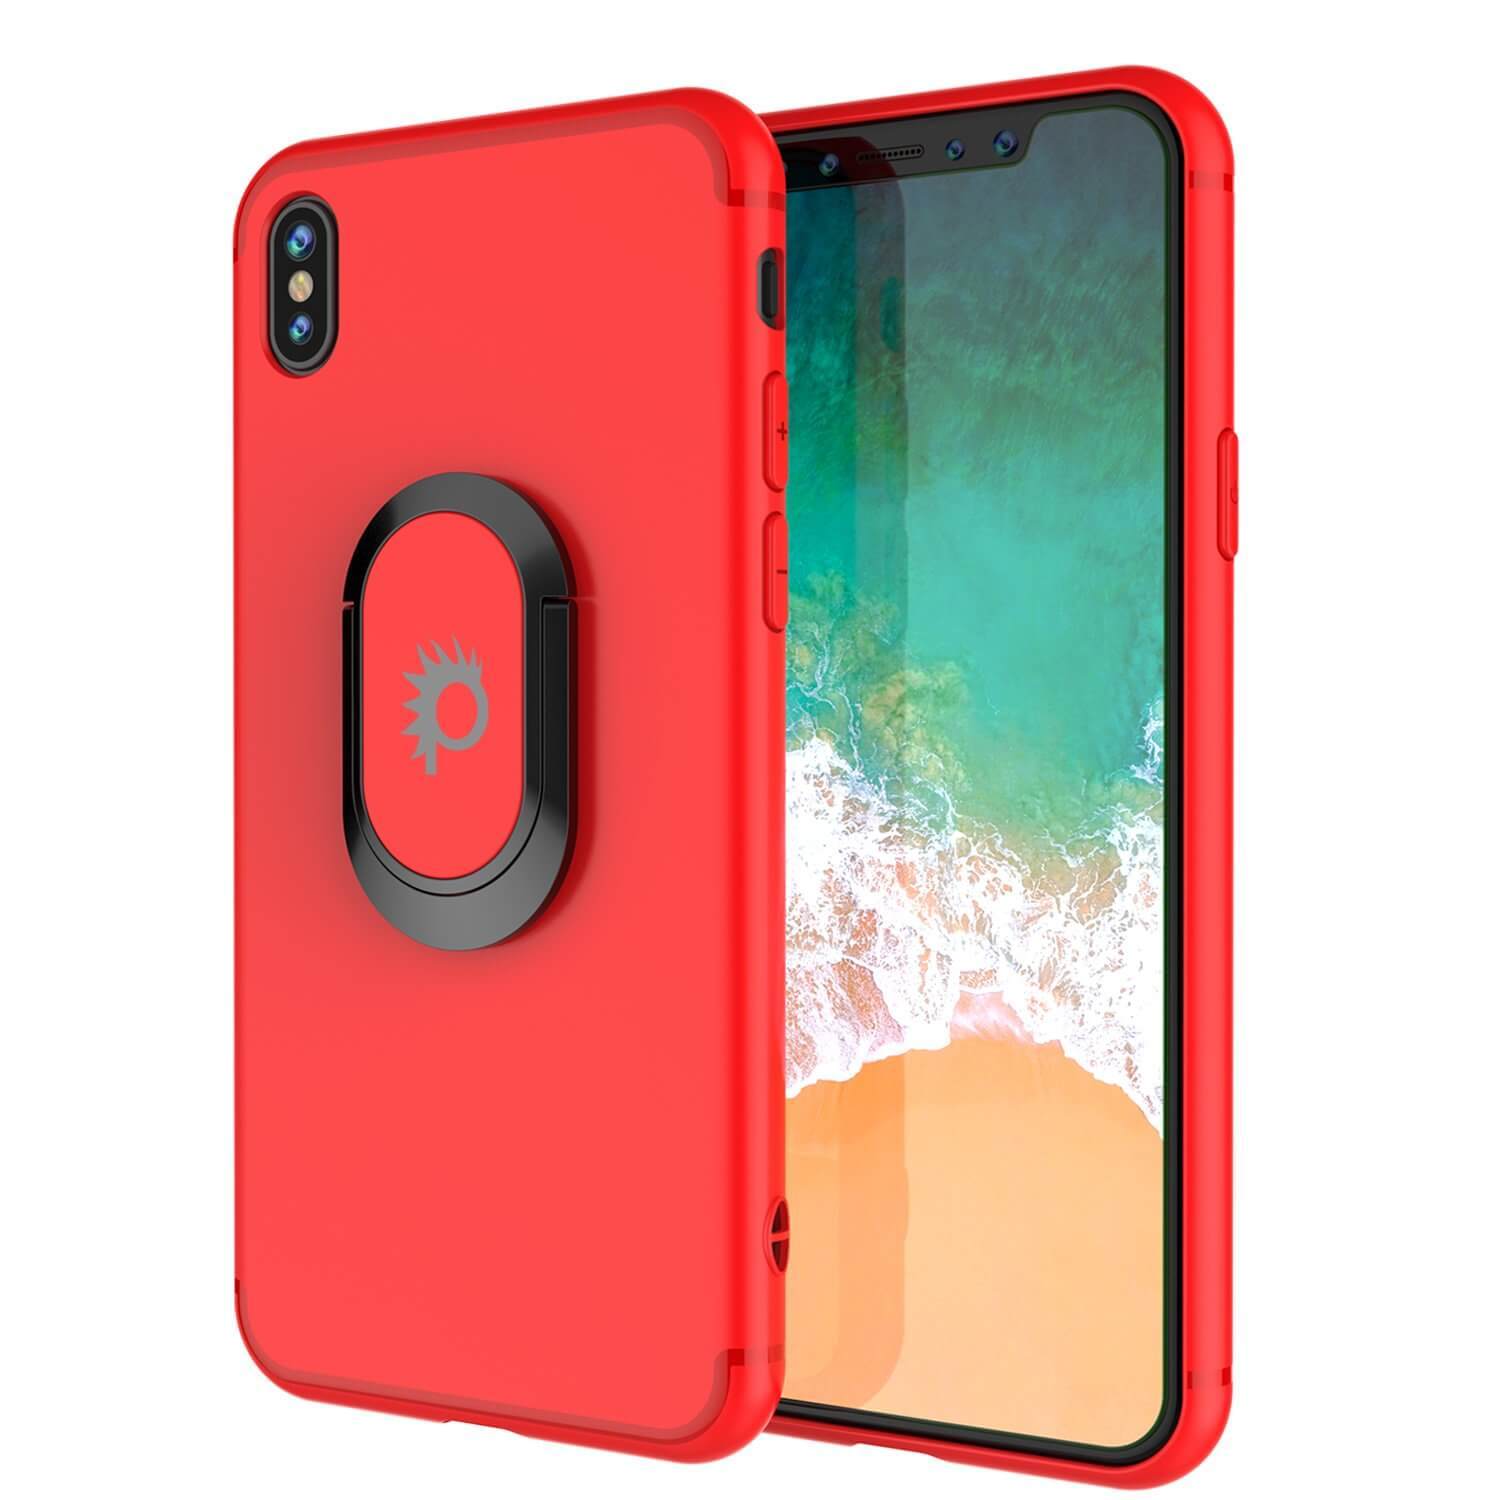 iPhone XS Case, Punkcase Magnetix Protective TPU Cover W/ Kickstand, Tempered Glass Screen Protector [Red] (Color in image: red)